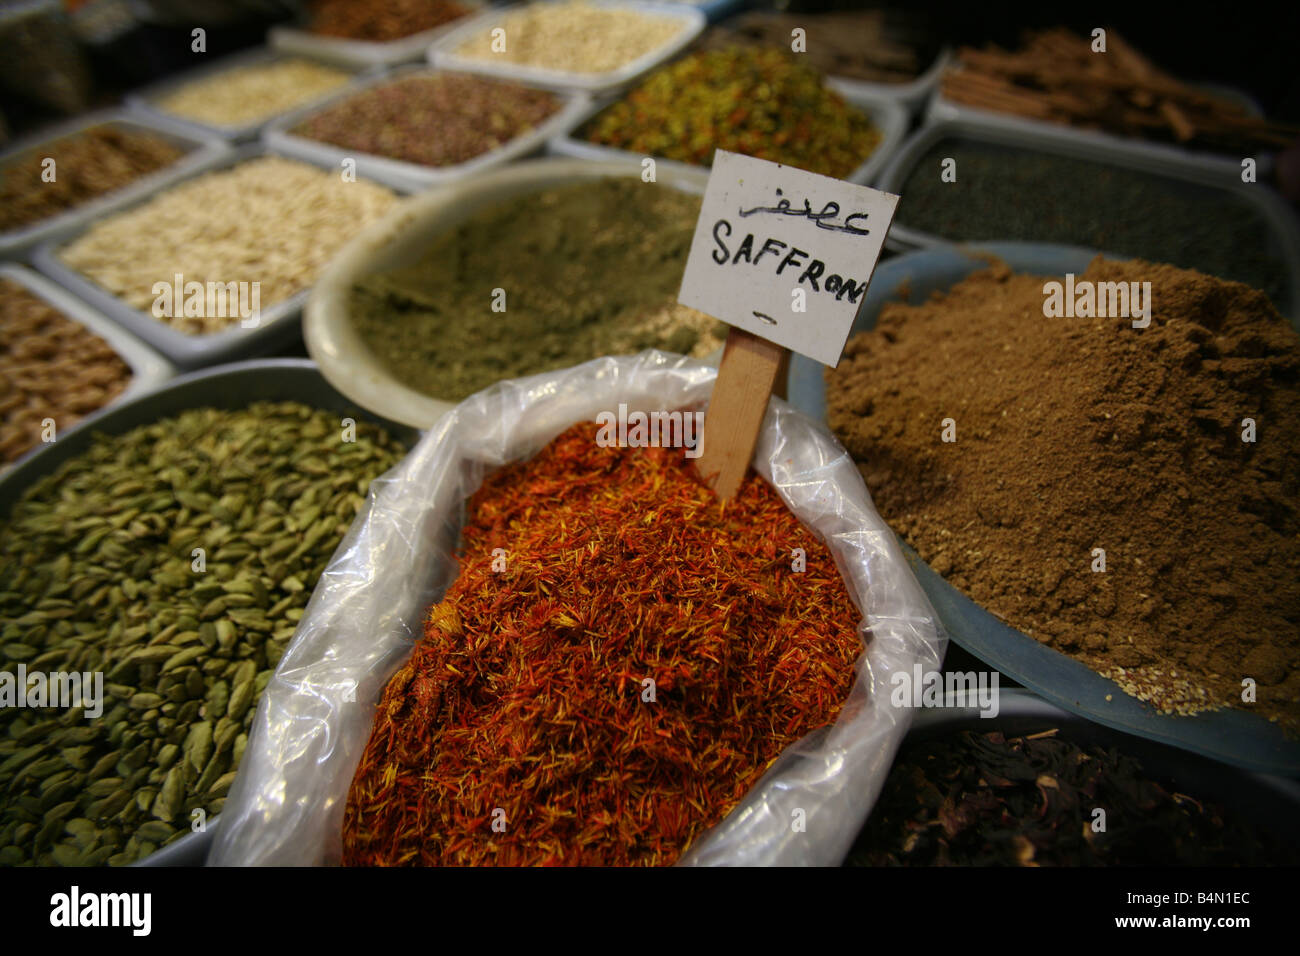 Saffron and other spices and food for sale at a market in the old city section of Jerusalem Stock Photo